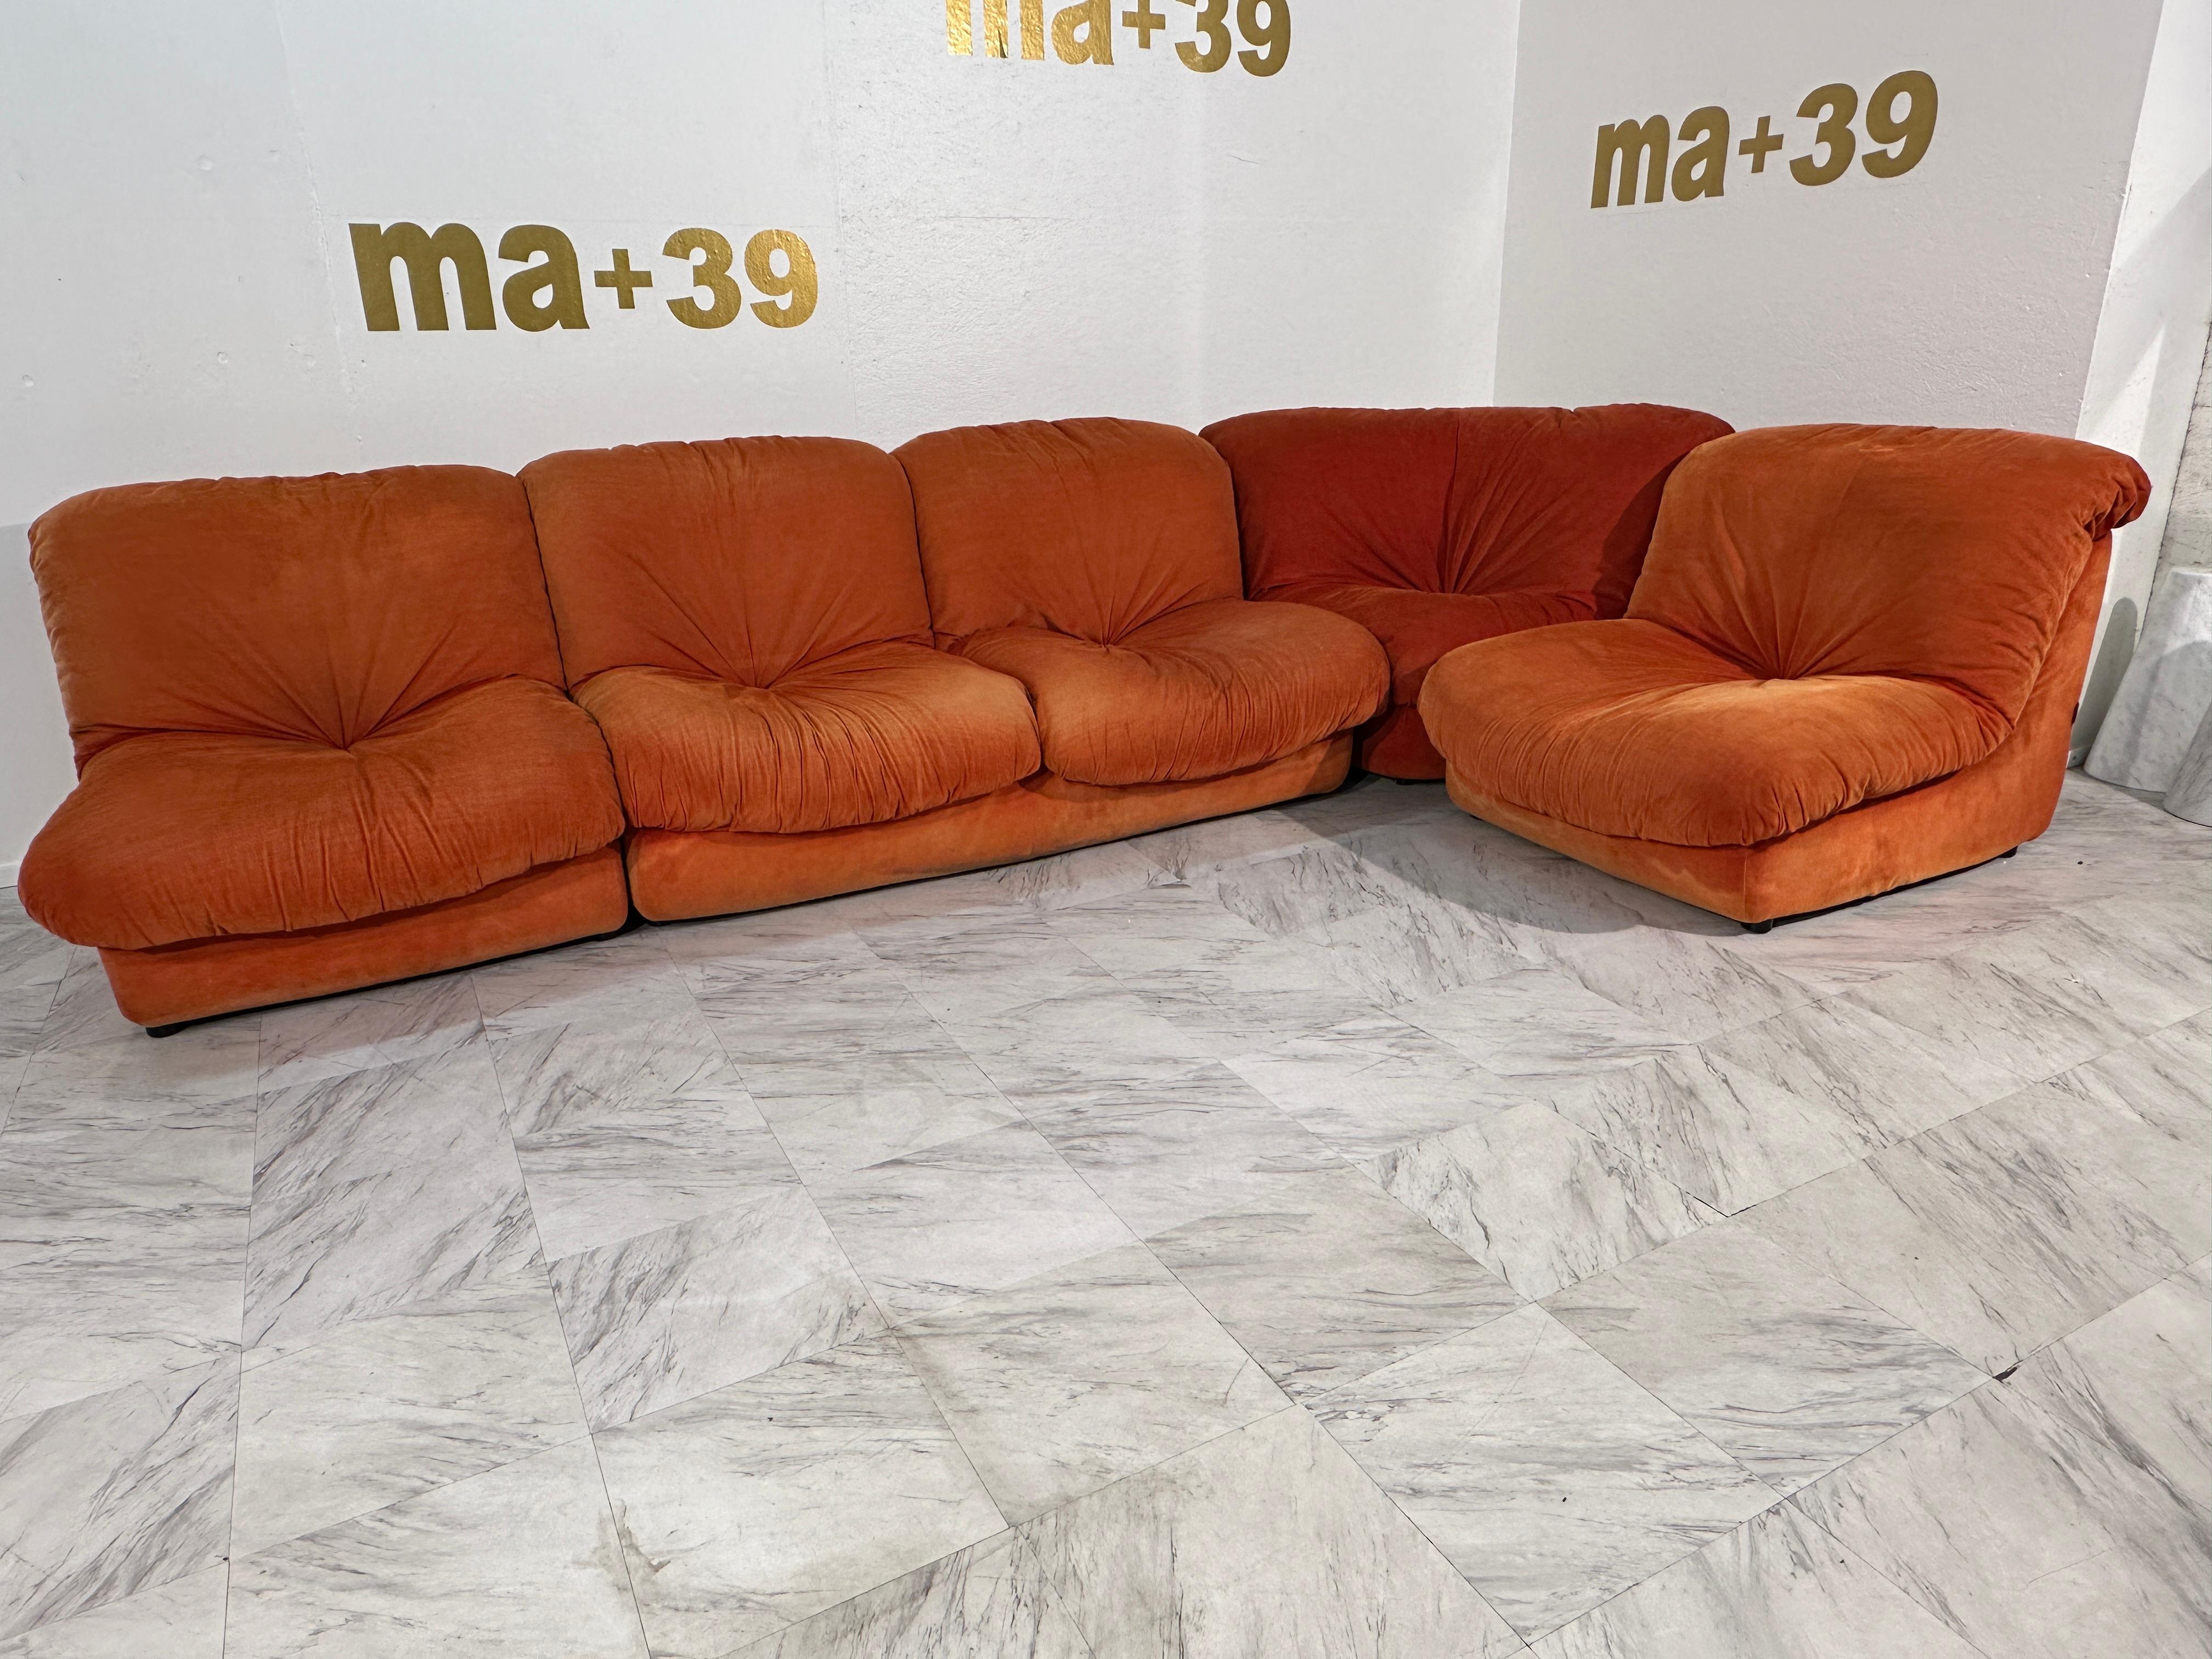 Vintage Italian Modular Sofa From Airborne, 1960s Italy 5 pieces For Sale 1